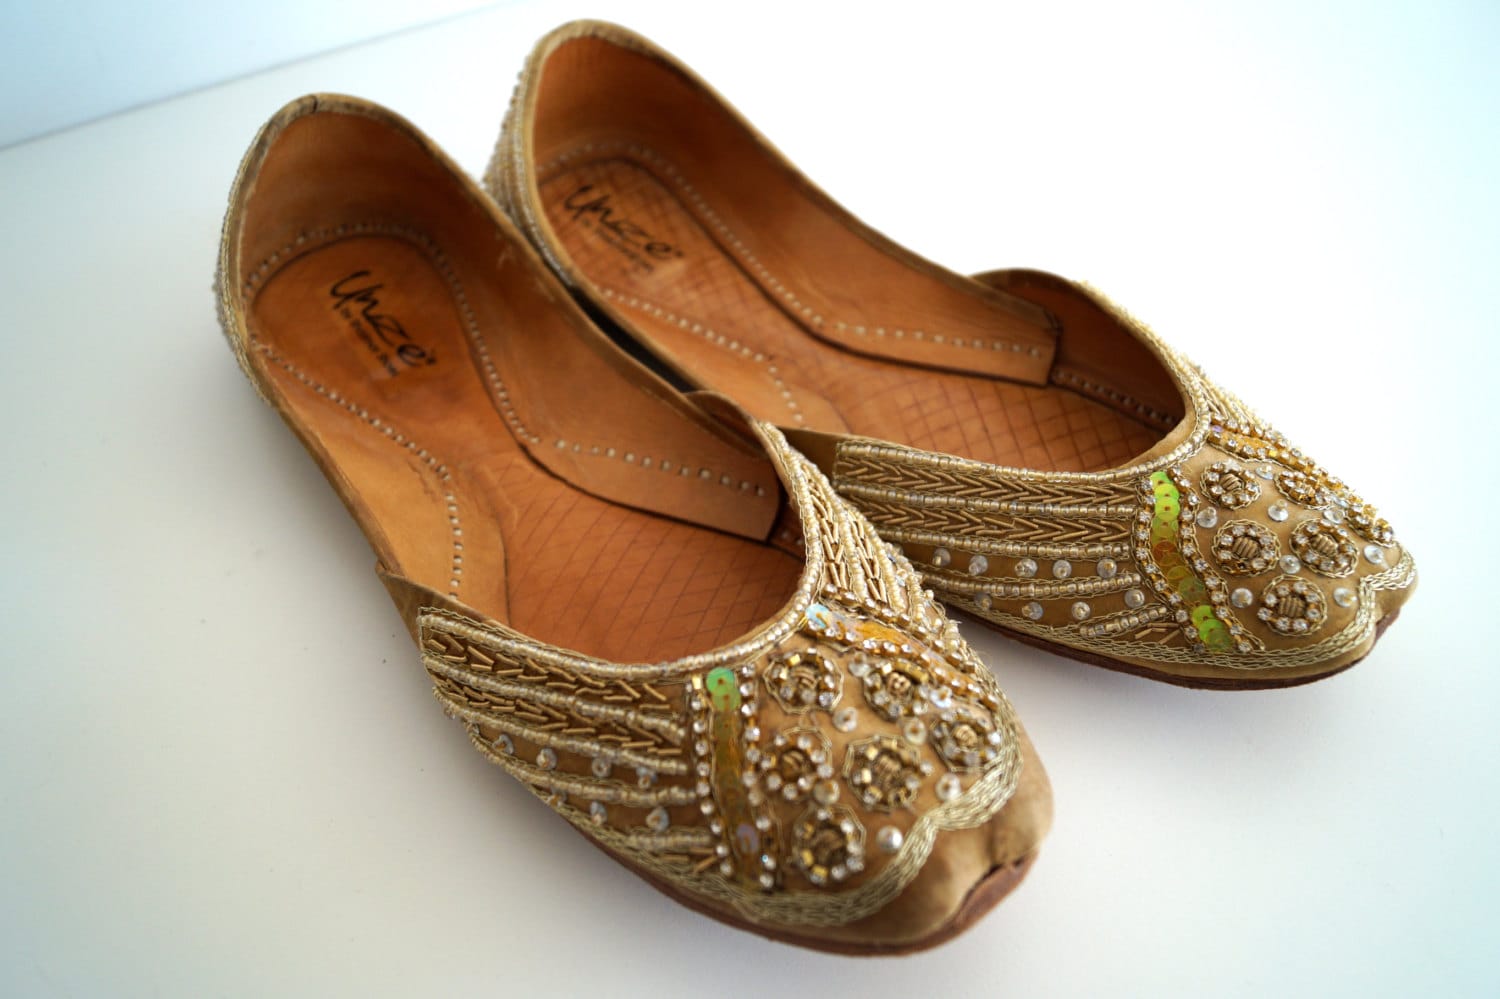 Indian shoes Vintage women's leather shoes Embroidered